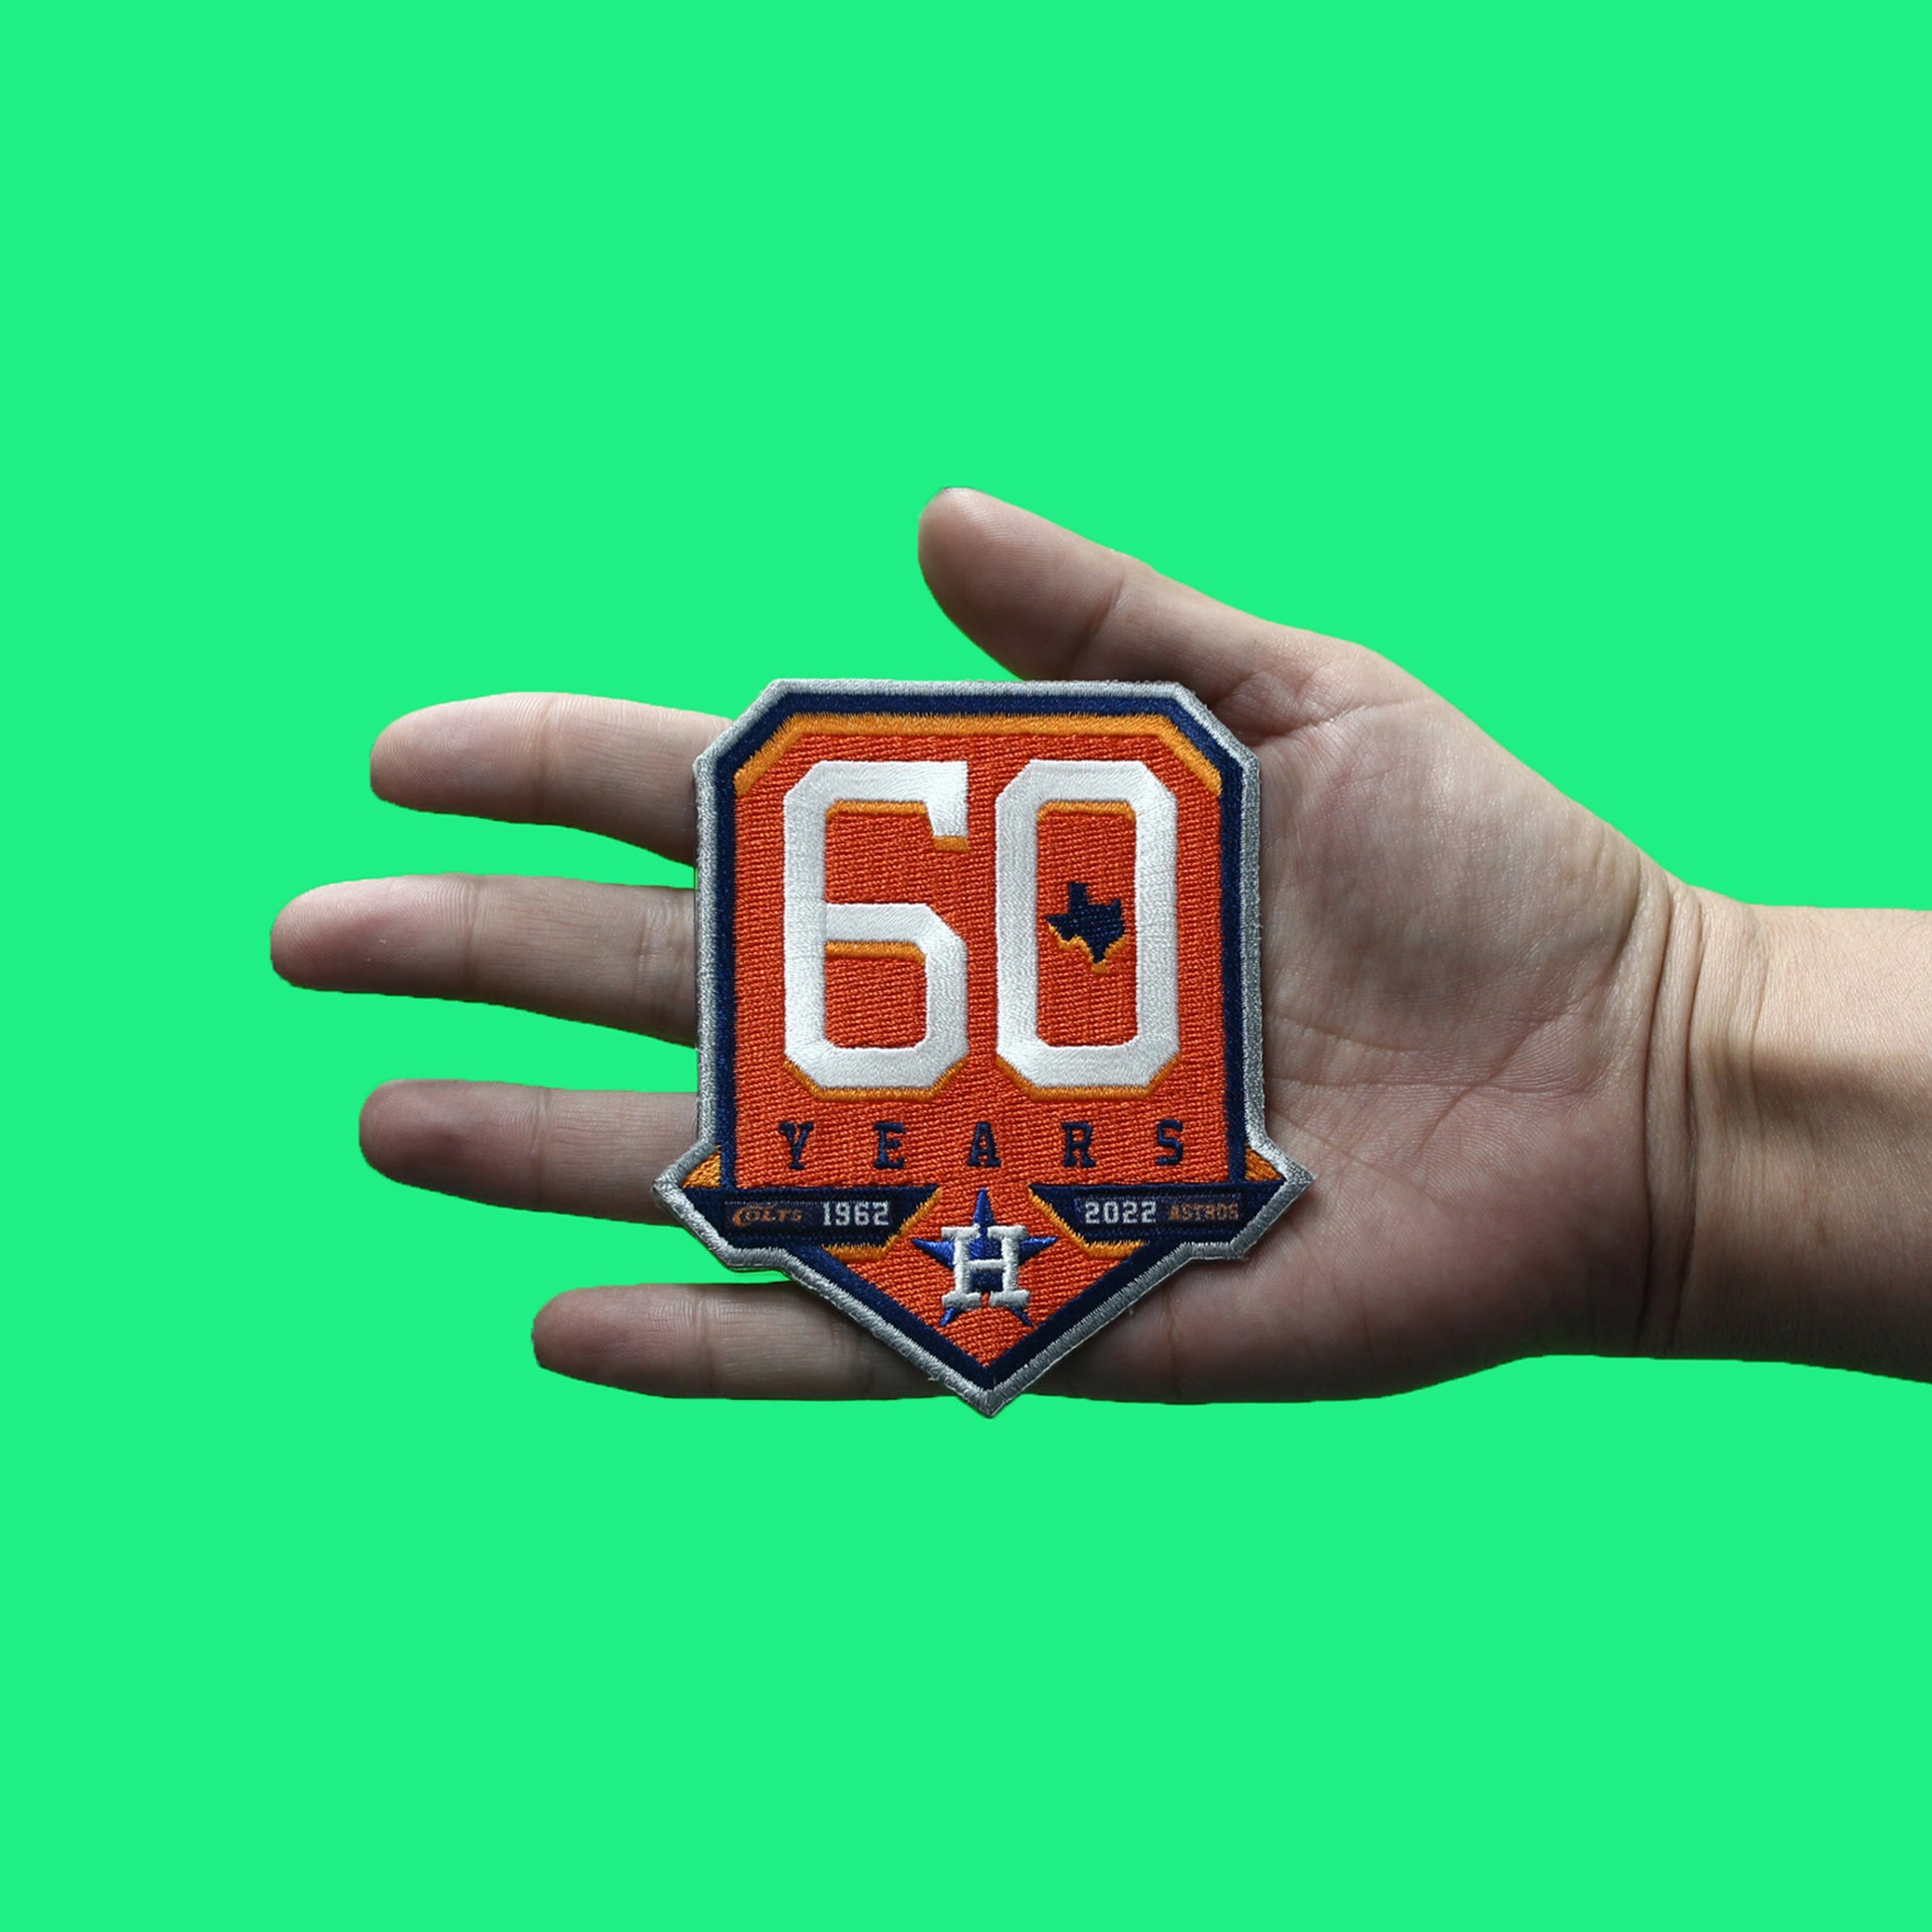 60th anniversary patch